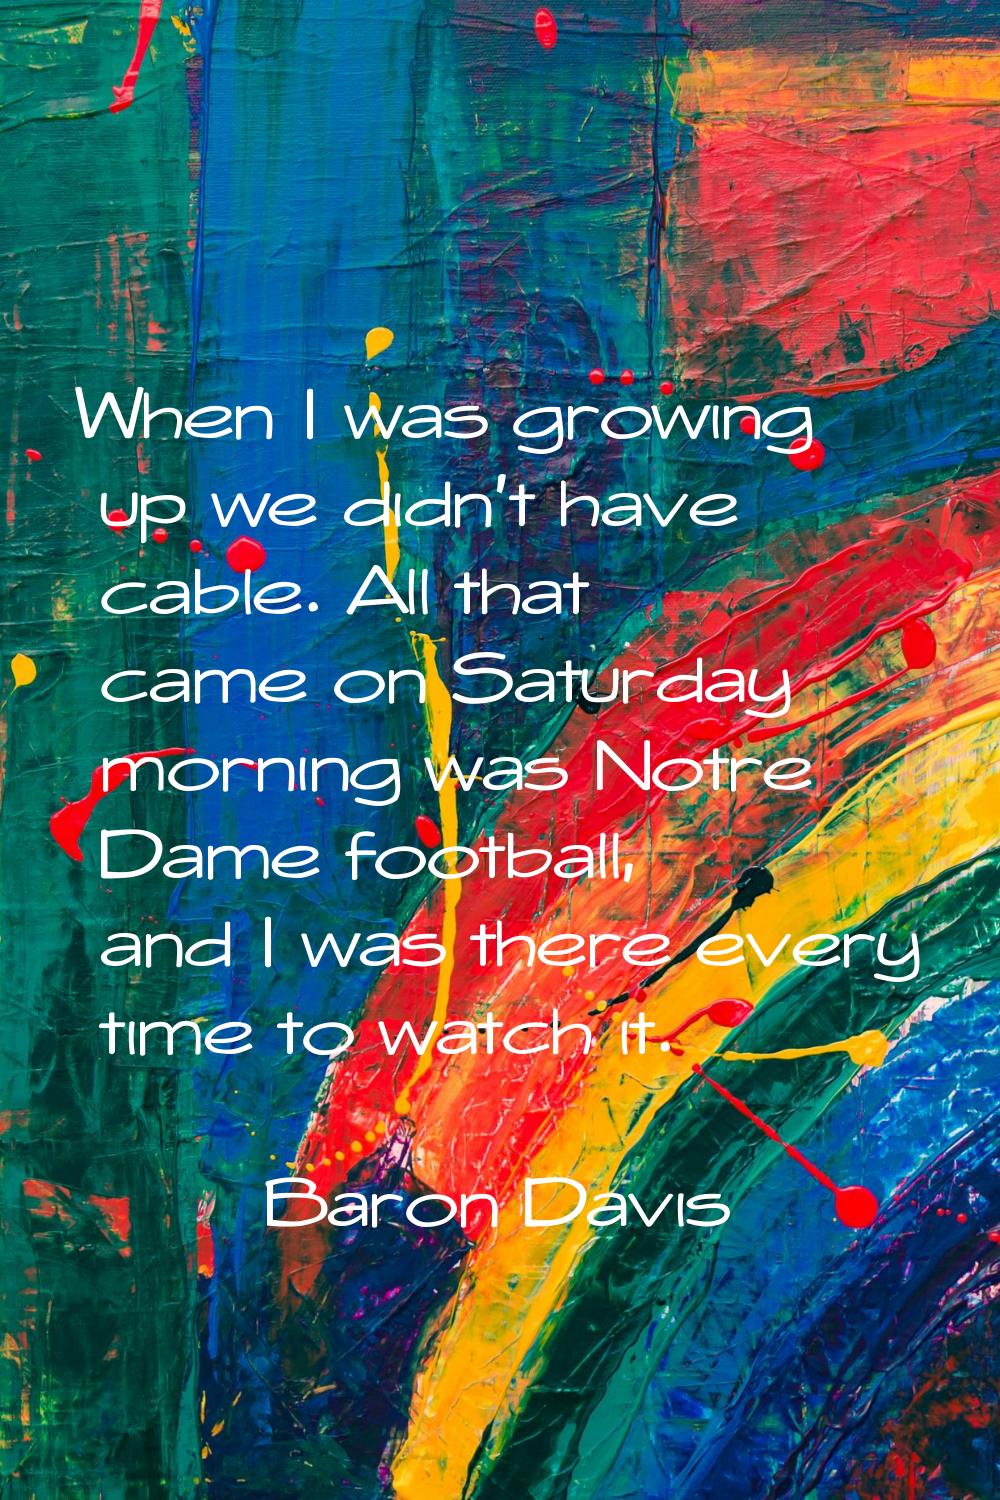 When I was growing up we didn't have cable. All that came on Saturday morning was Notre Dame footba